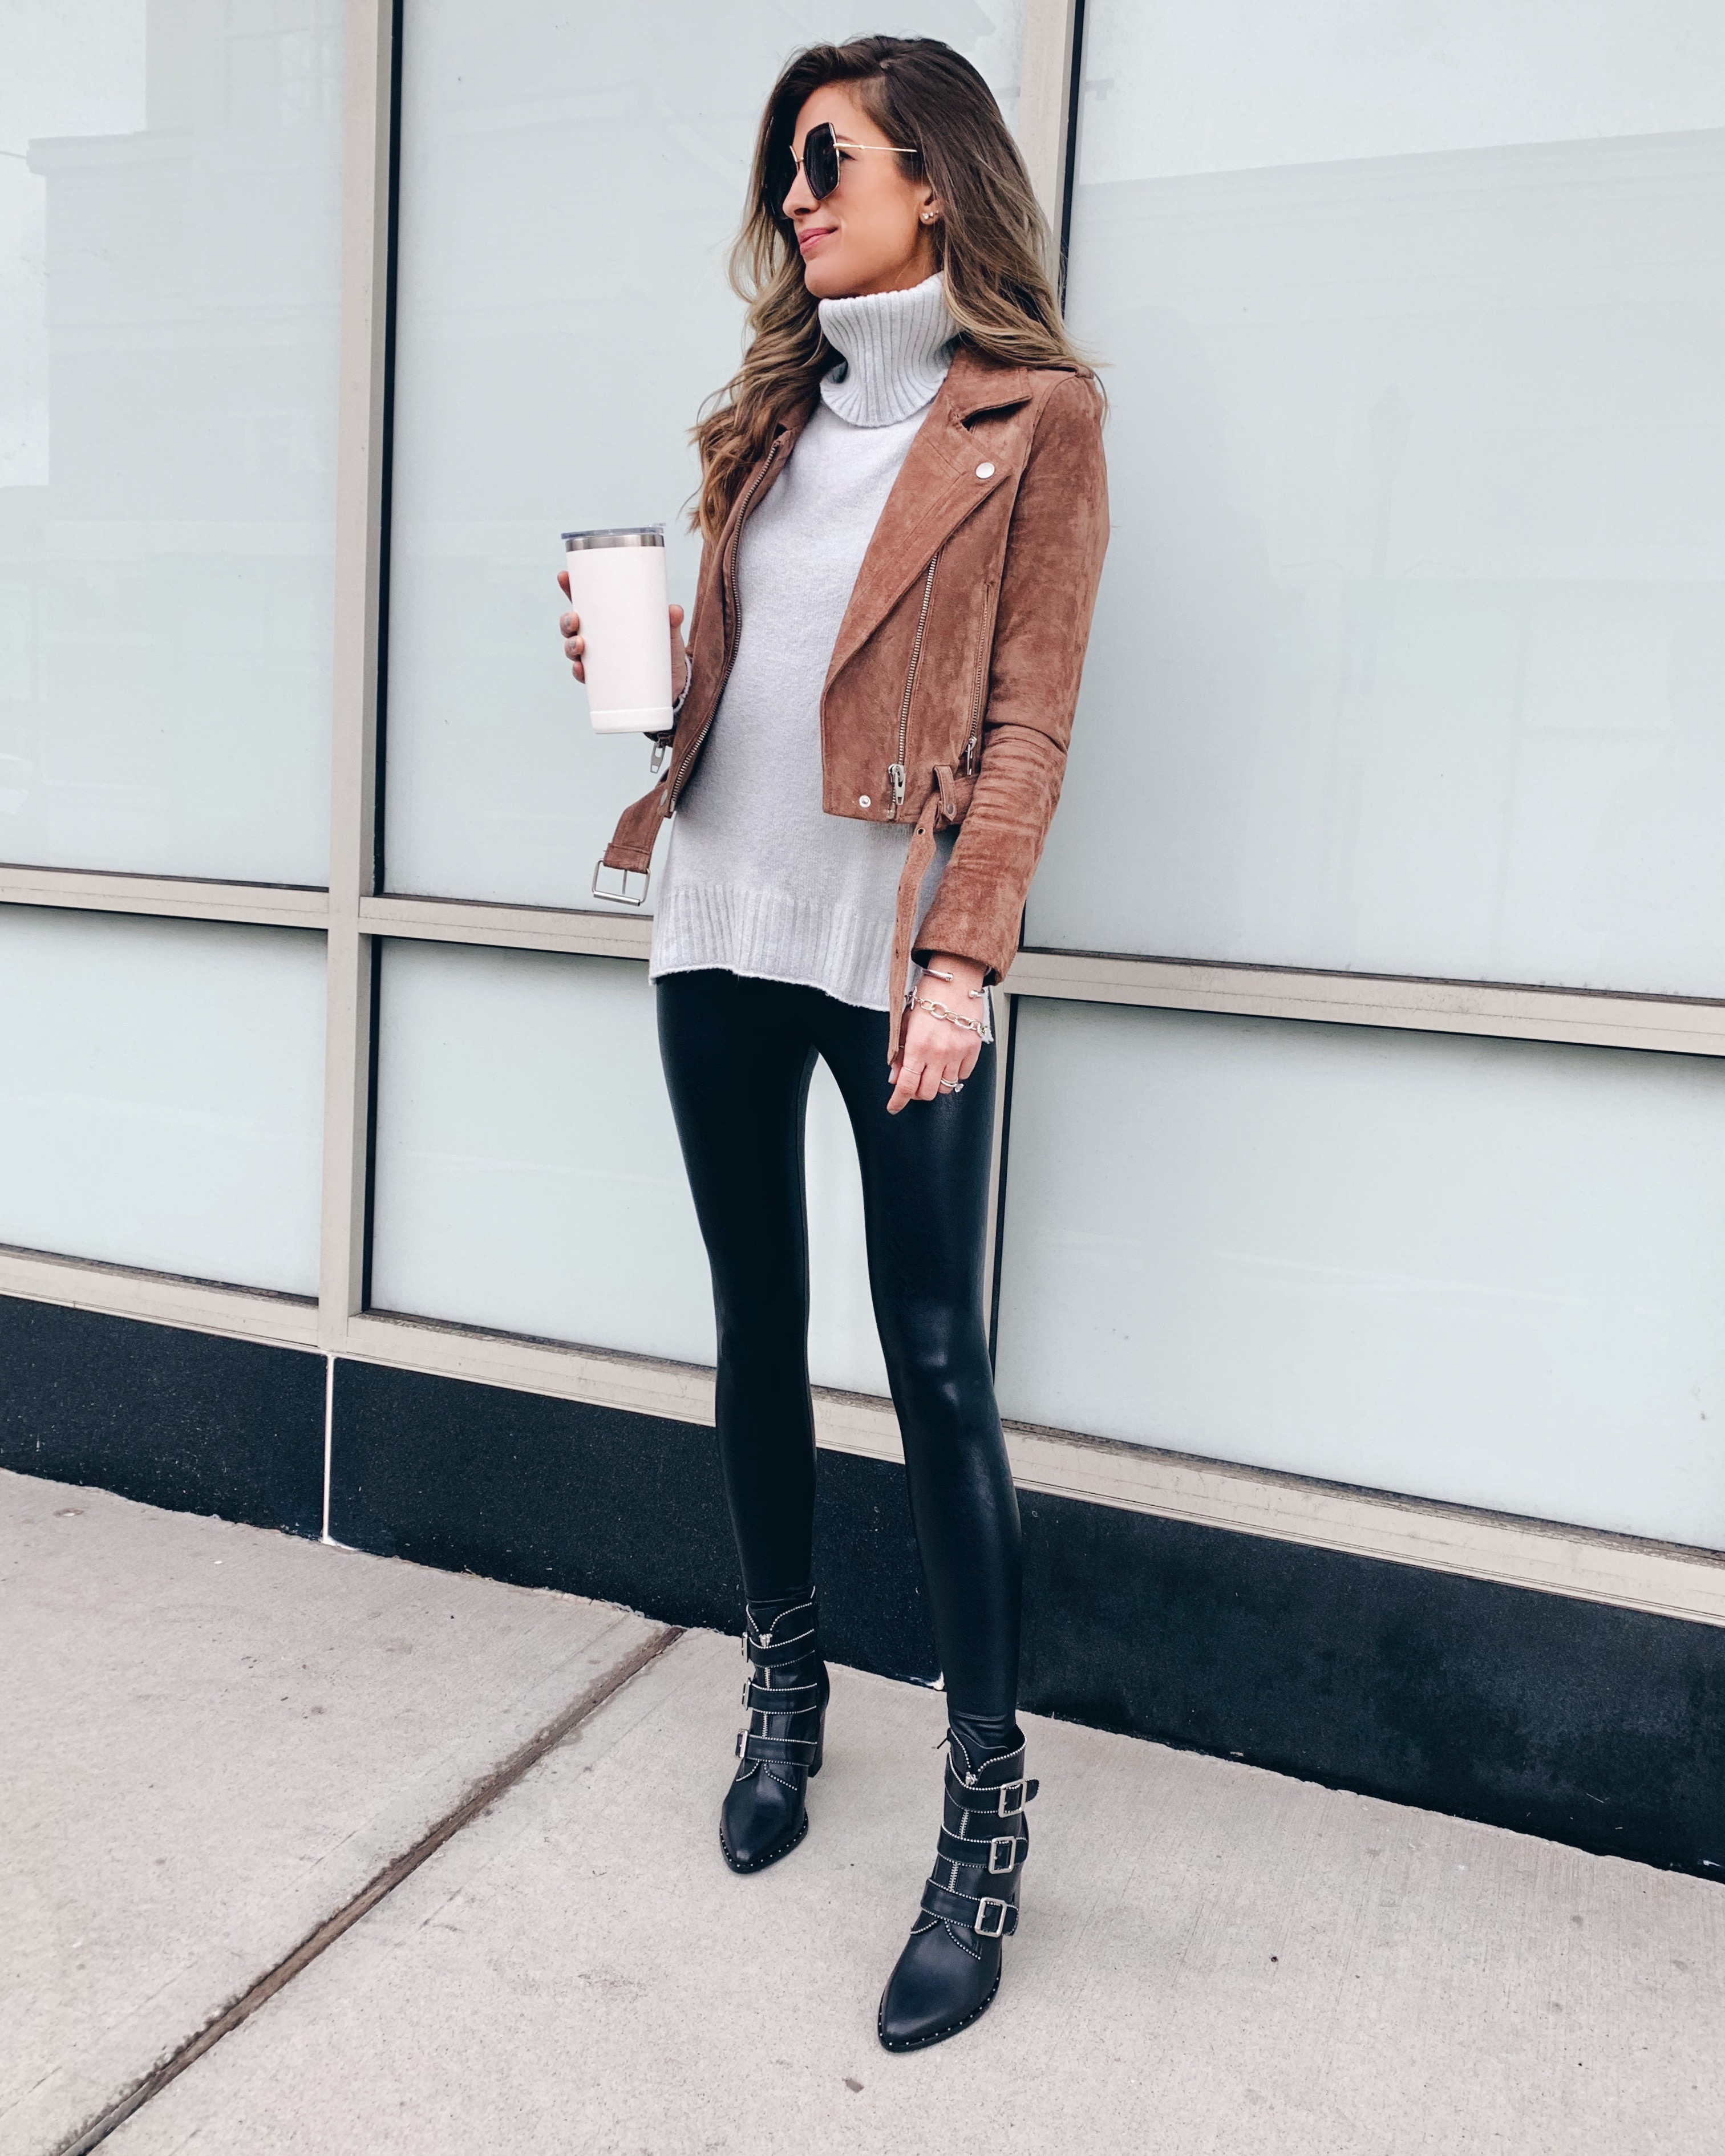 Faux Leather Leggings OOTD: Shades of Brown  Outfits with leggings,  Leather leggings outfit, Winter fashion outfits